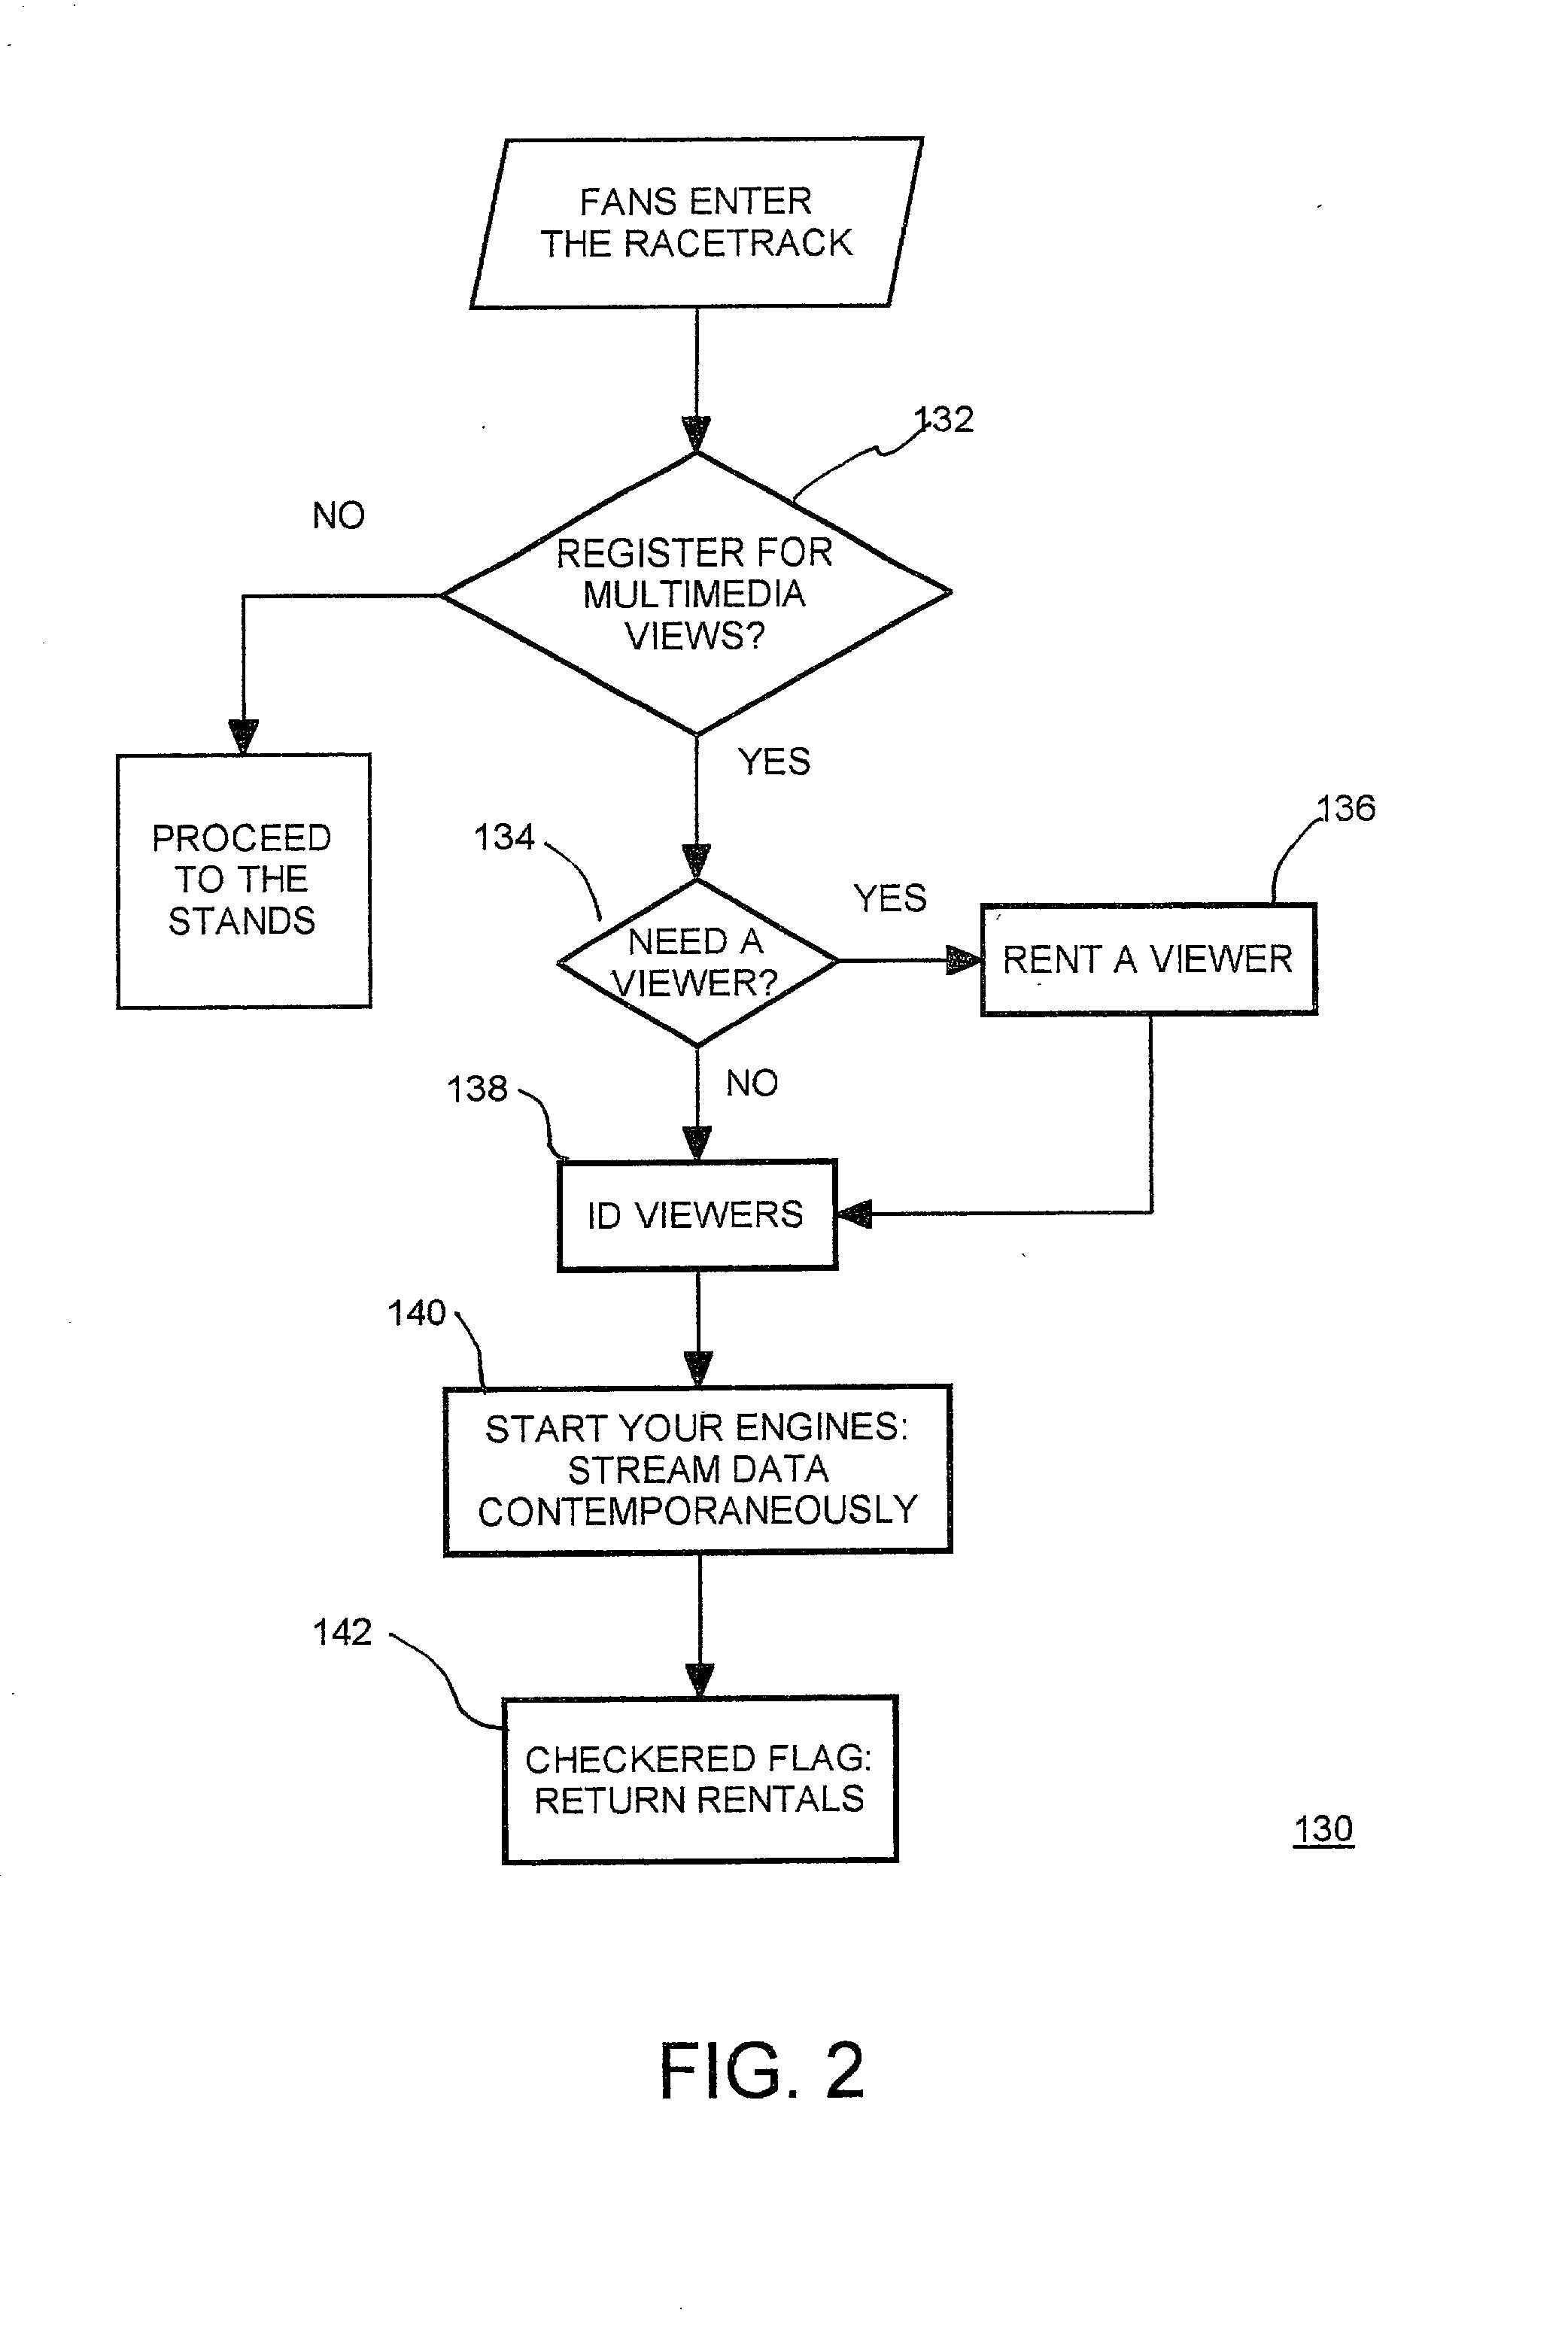 Wireless sports view display and business method of use